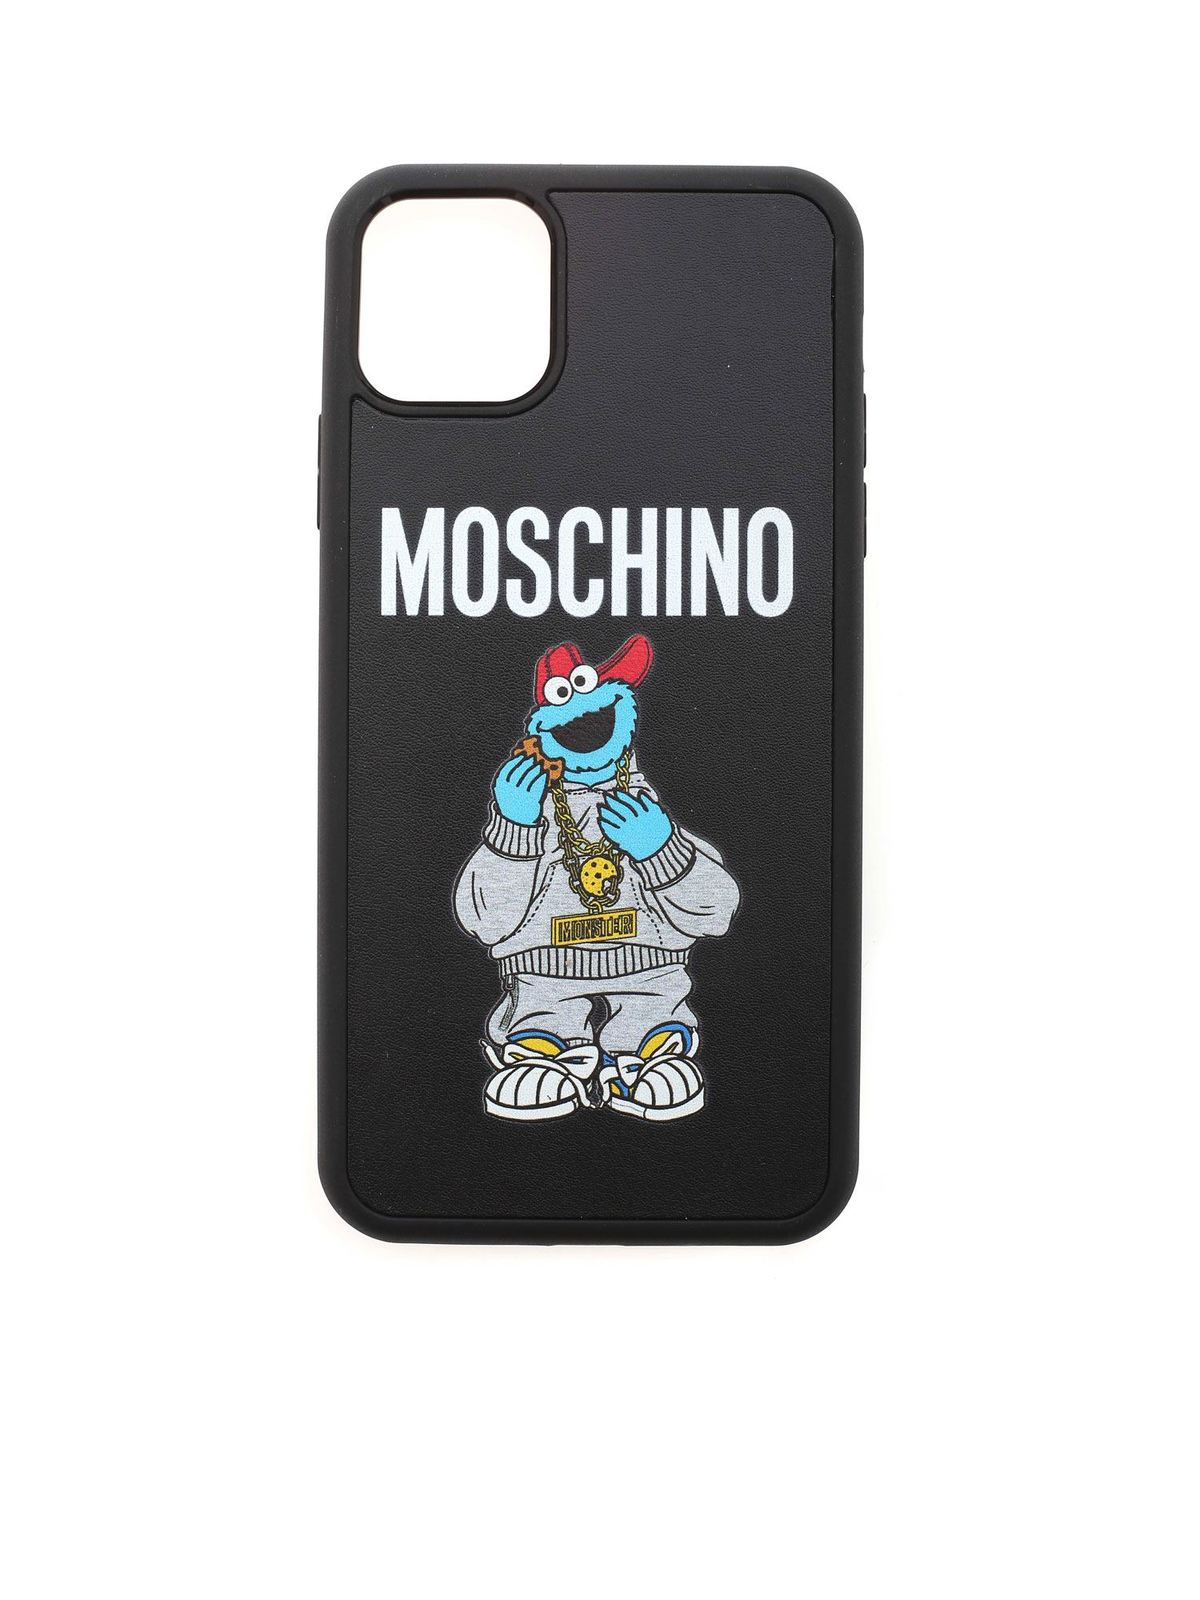 Cases & Covers Moschino - iPhone 11 Pro Max Sesame Street© cover in bla 797183522555